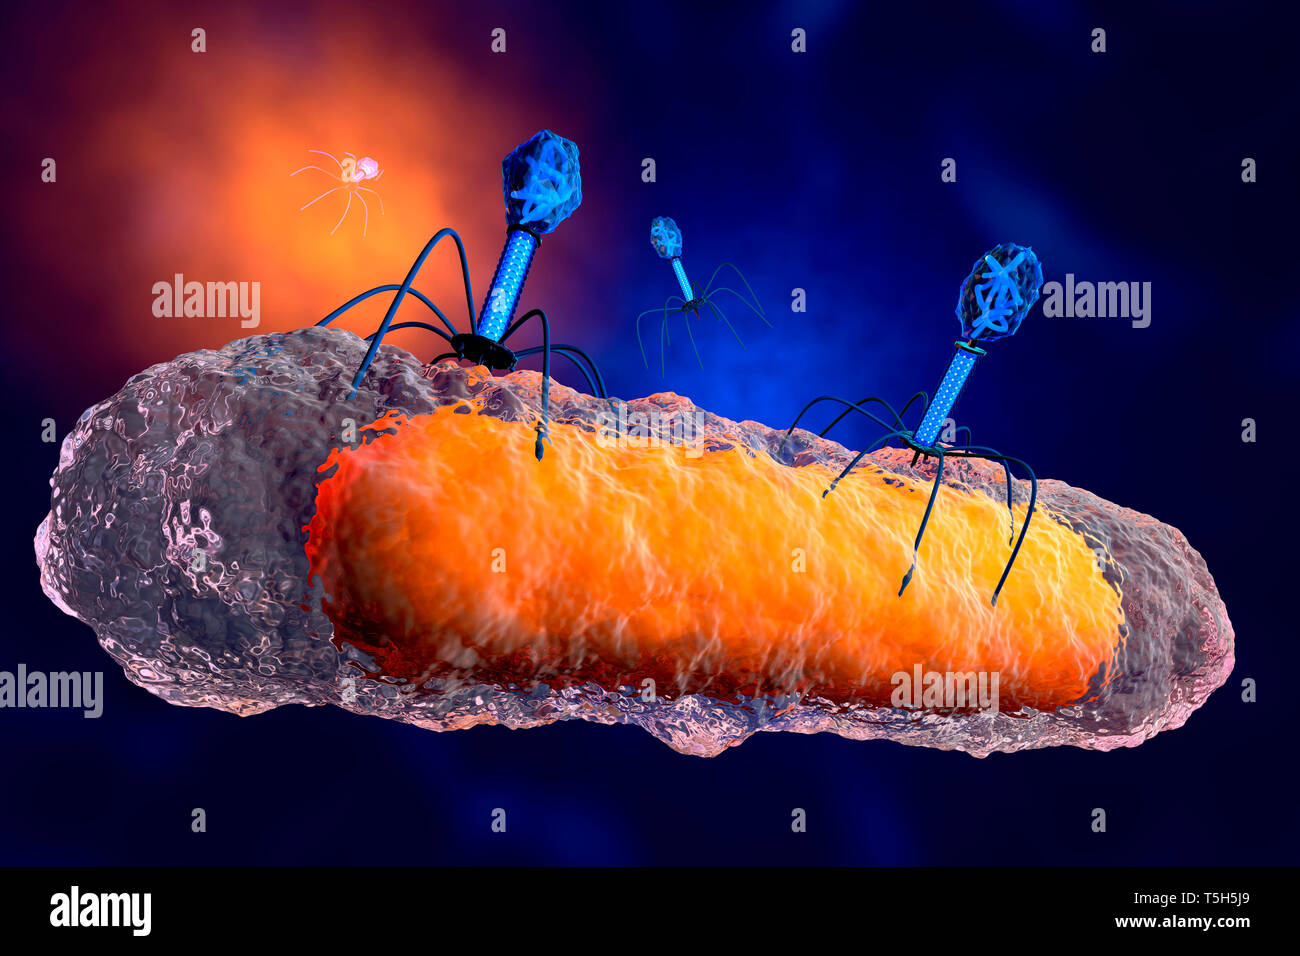 3D rendered Illustration of a anatomically correct group of bacteriophage viruses attacking a bacteria Stock Photo